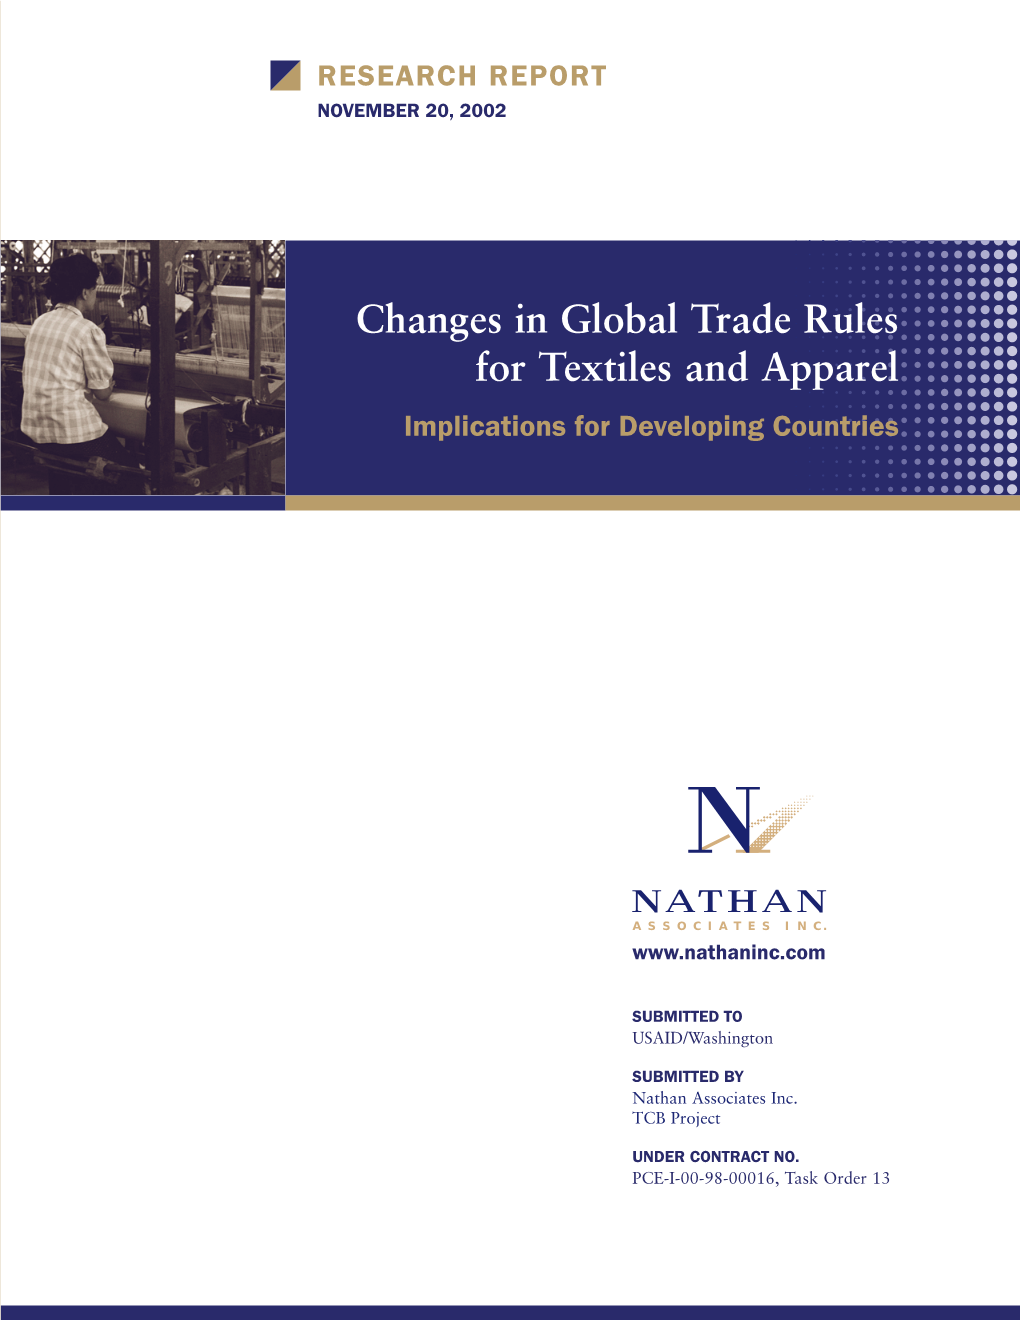 Changes in Global Trade Rules for Textiles and Apparel Implications for Developing Countries